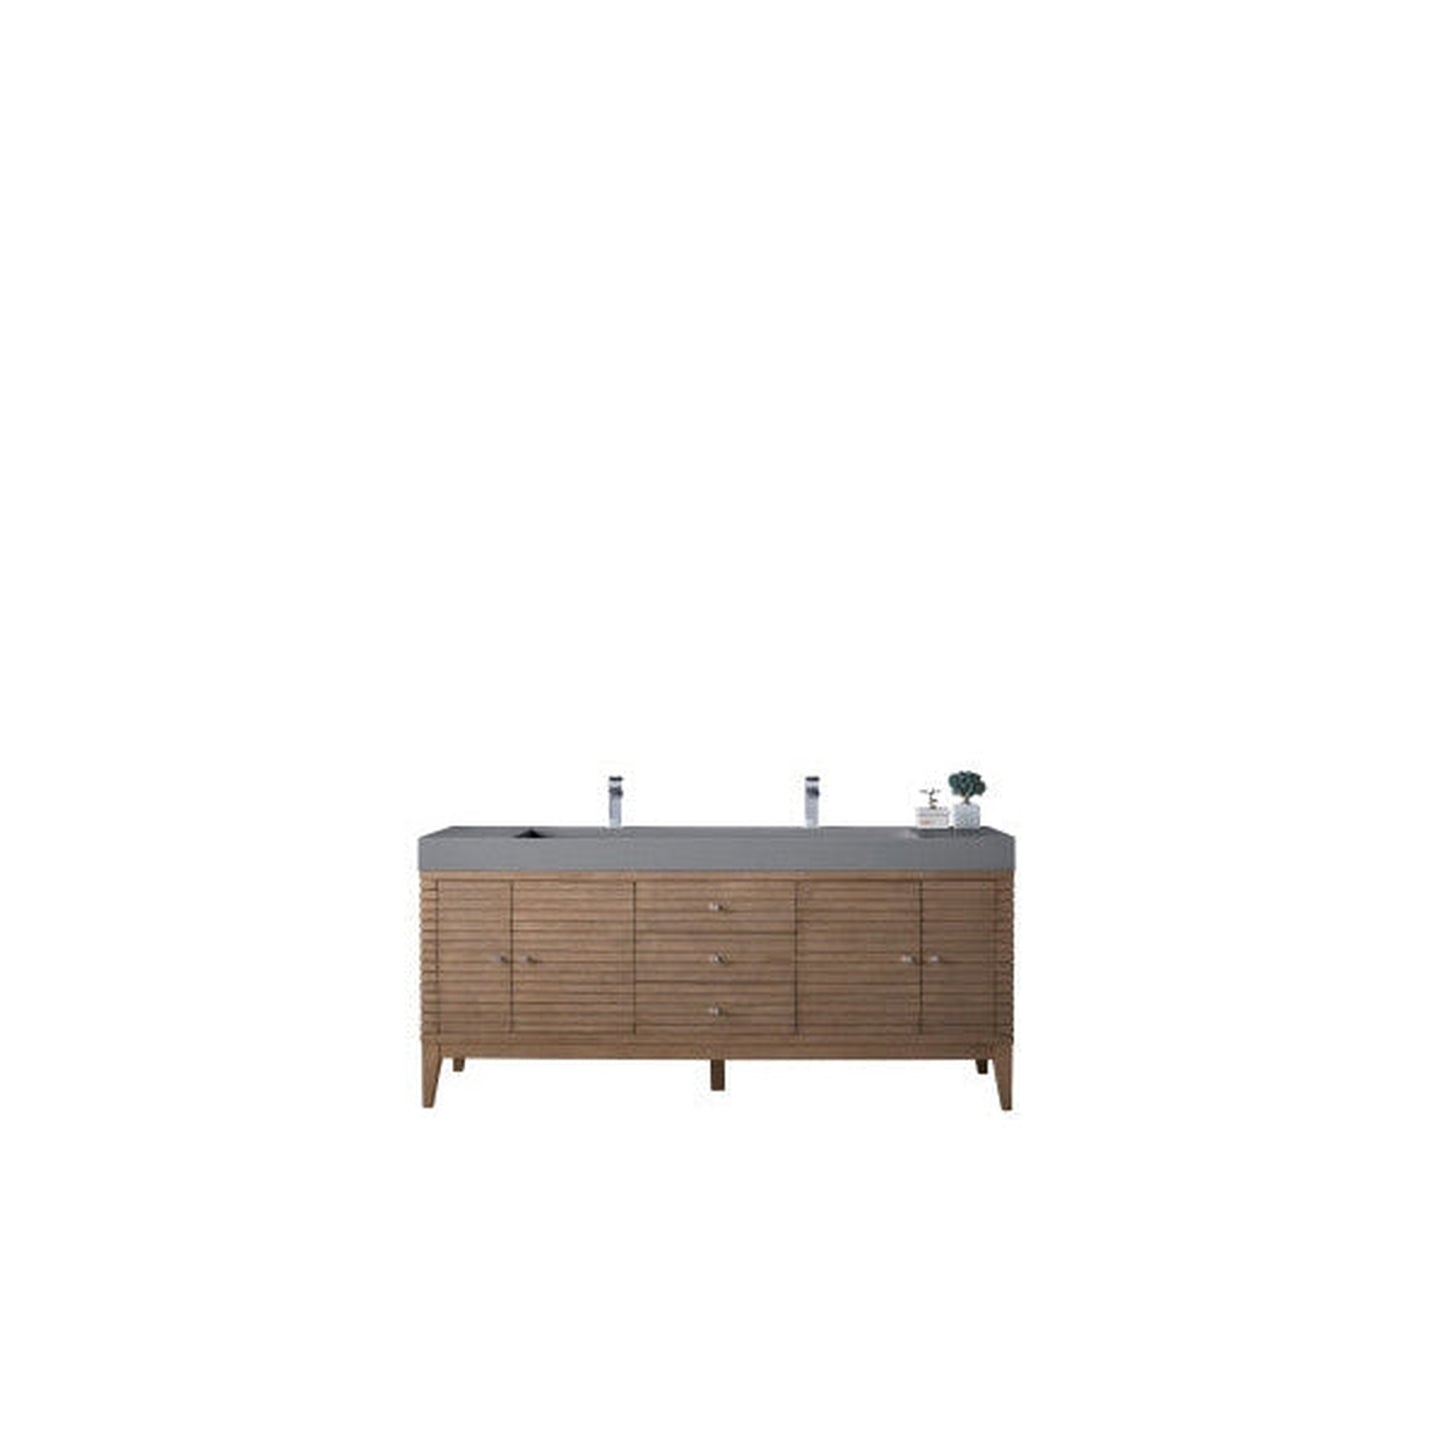 James Martin Linear 73" Double Whitewashed Walnut Bathroom Vanity With 6" Glossy Dusk Gray Composite Countertop